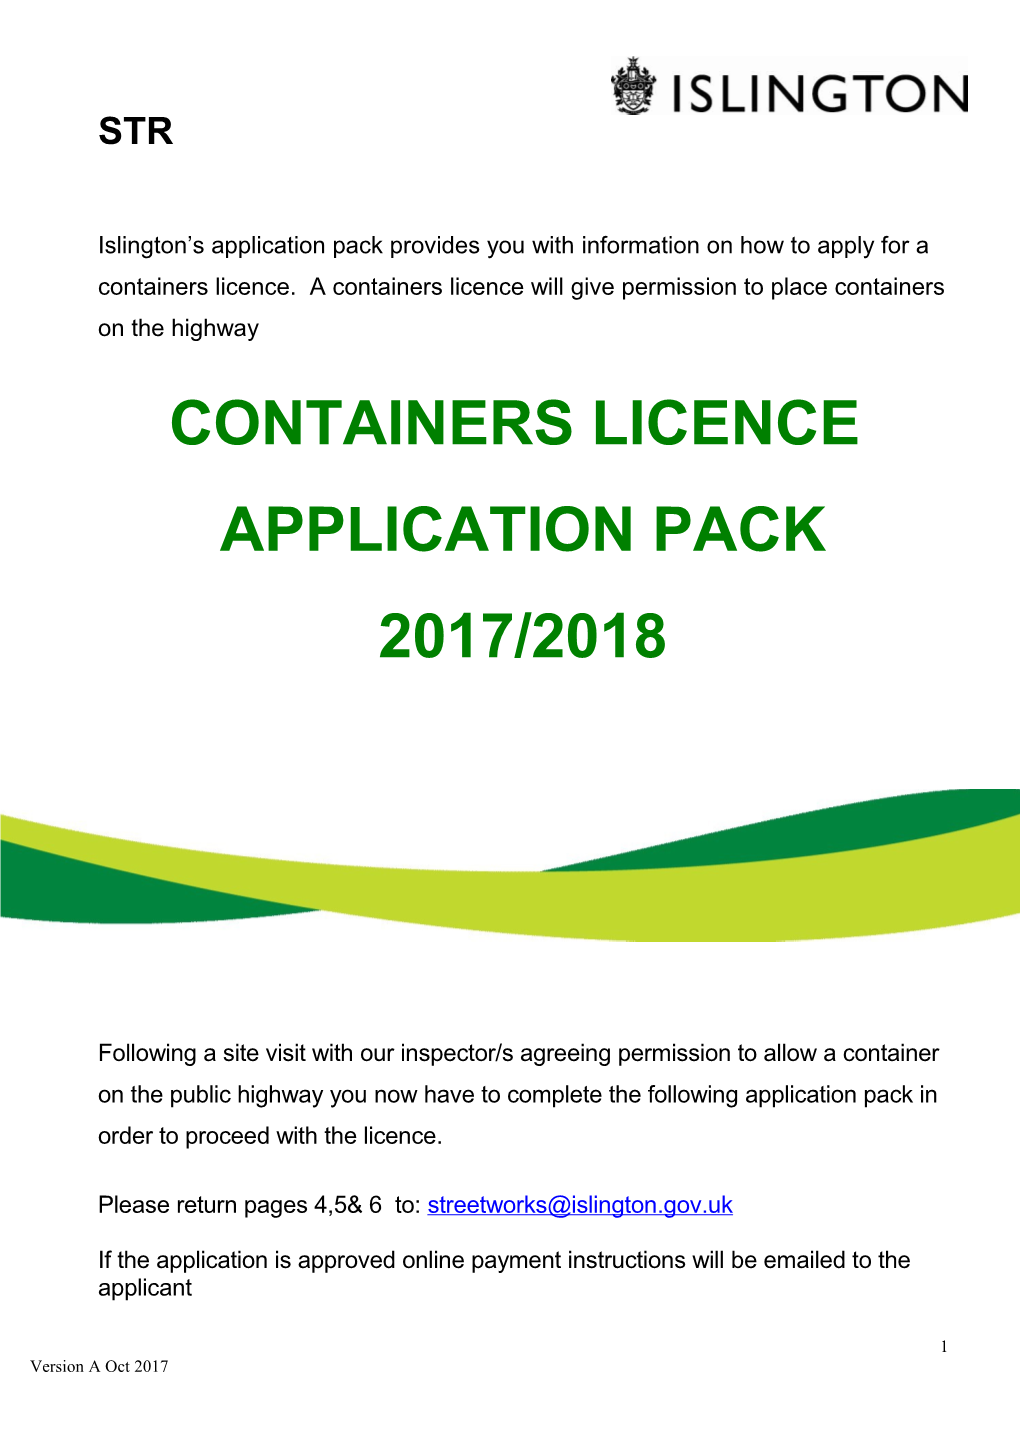 2017 Containers Application Version a Oct 2017